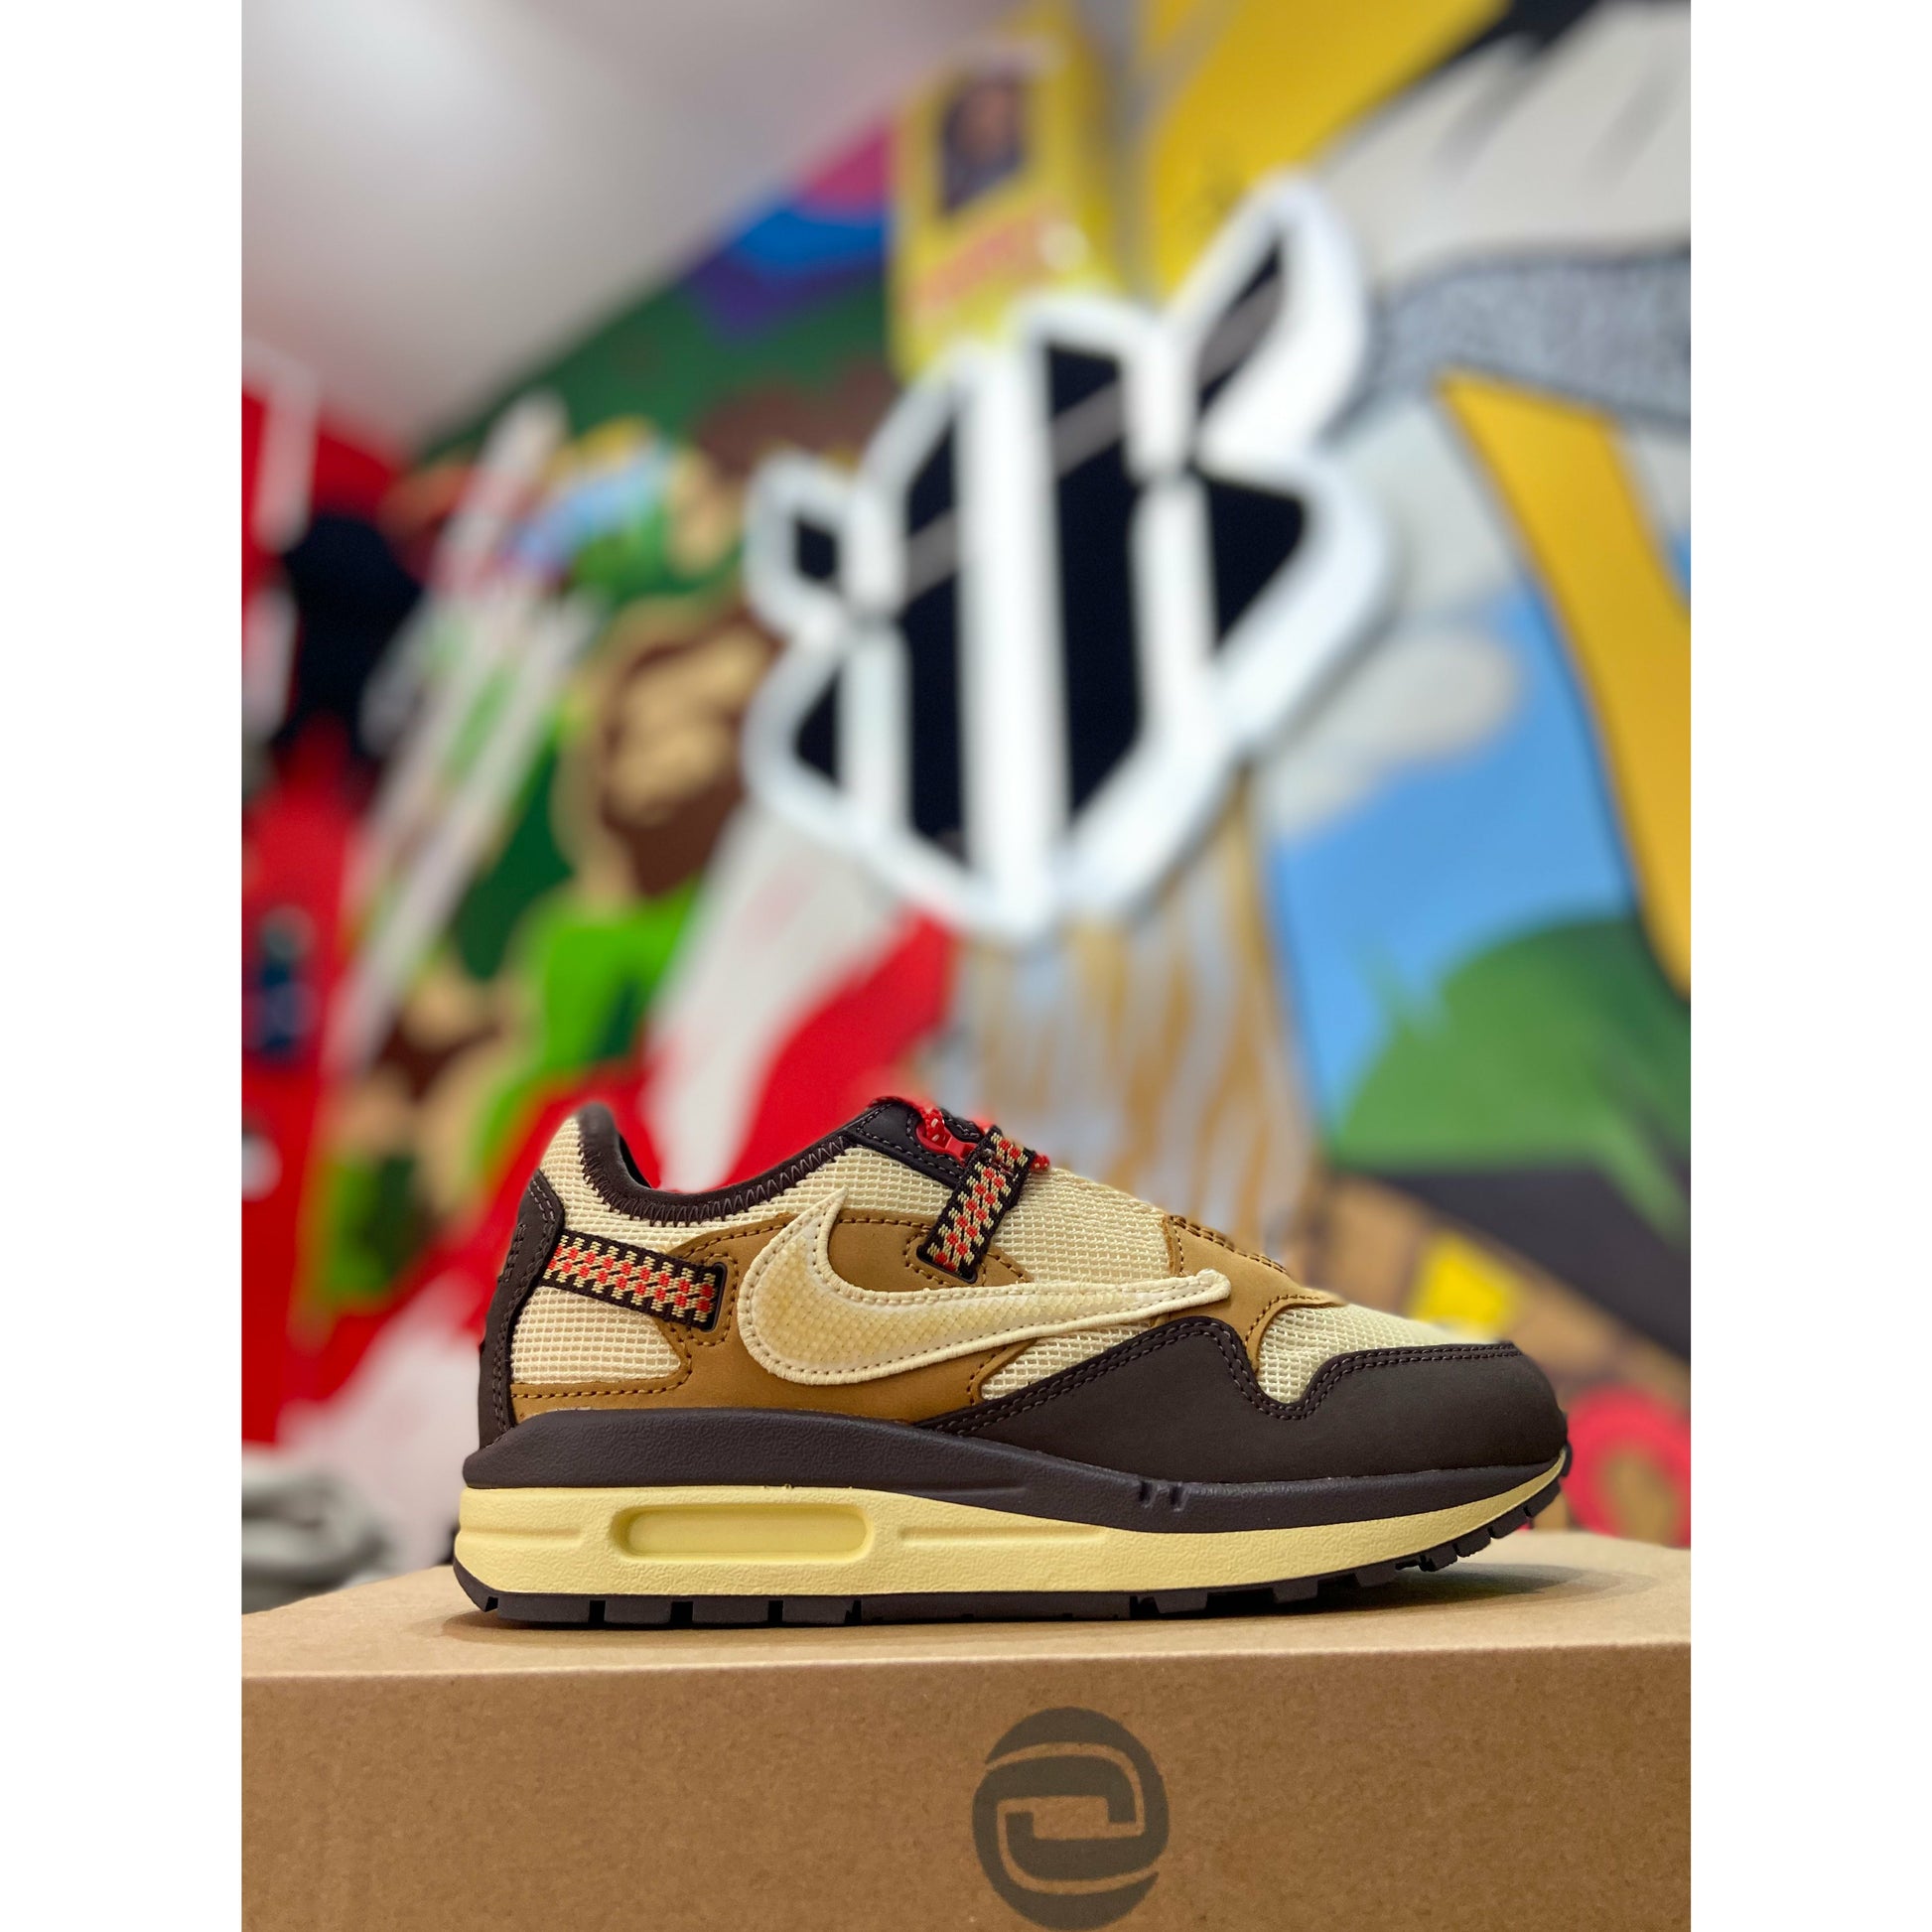 Nike Air Max 1 Travis Scott Cactus Jack Baroque Brown by Nike from £332.99